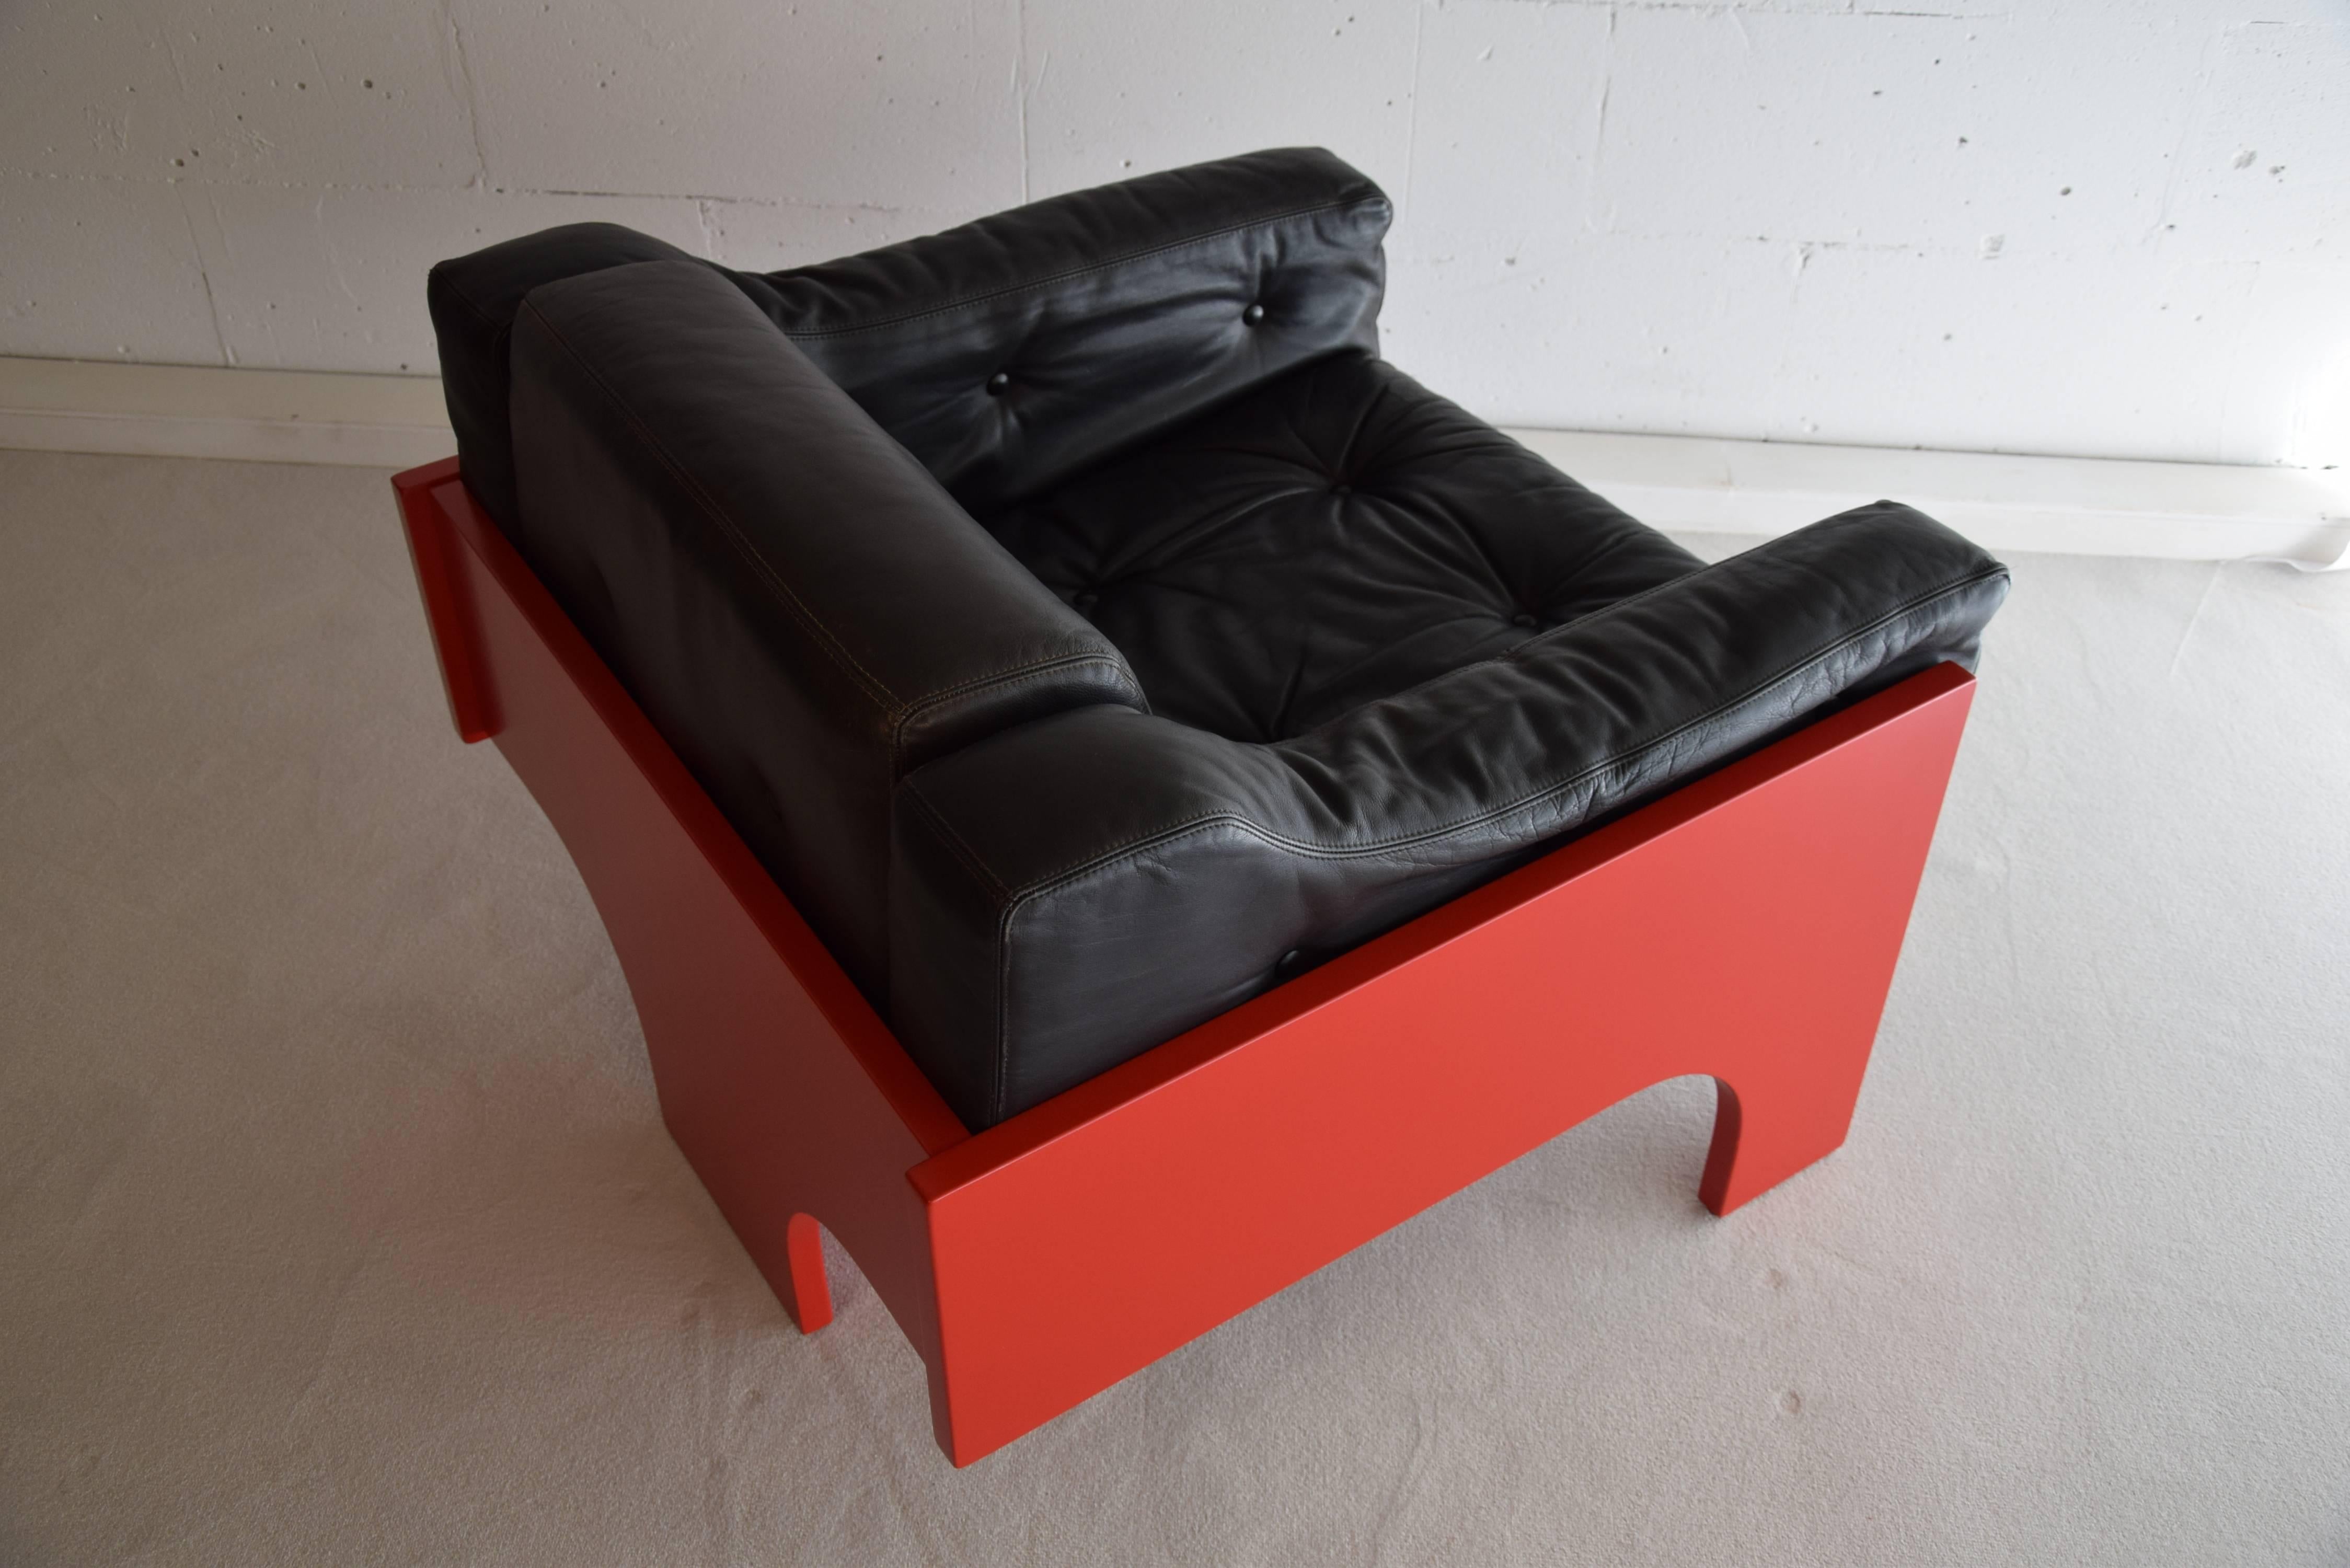 Two mid century modern Oriolo lounge chairs by Claudio Salocchi for Sormani, Italy.
Both chairs are in very good condition with leather cushions and red lacquered wood. 
Measurements: H 67 x W 85 x D 81 cm, seating height is 43 cm.
We also offer the